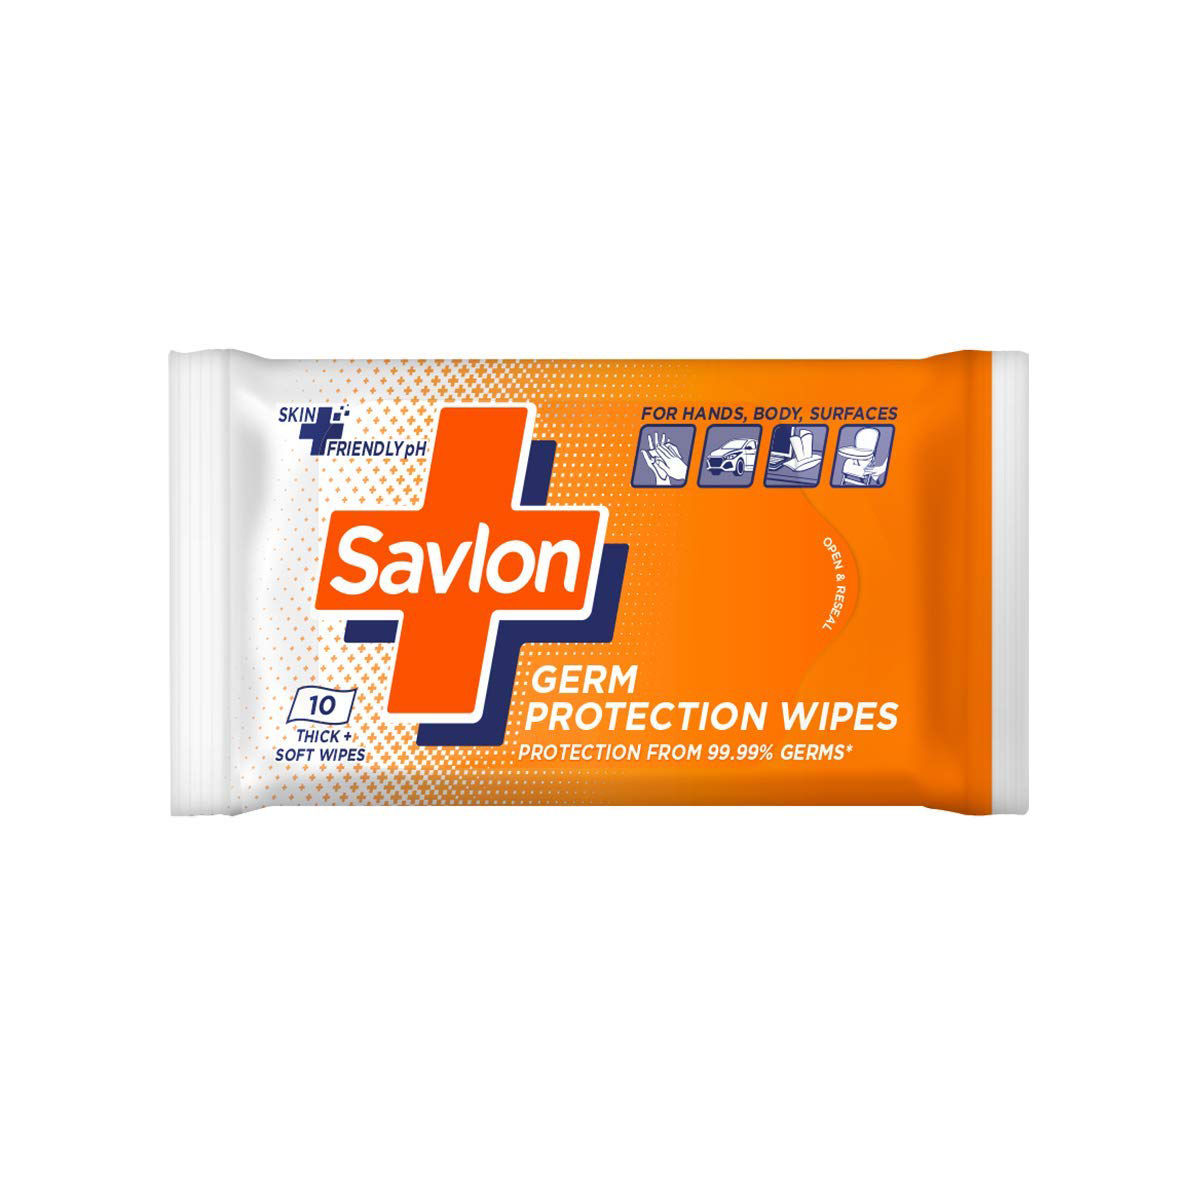 Savlon Germ Protection Wipes, 10 Count, Pack of 1 